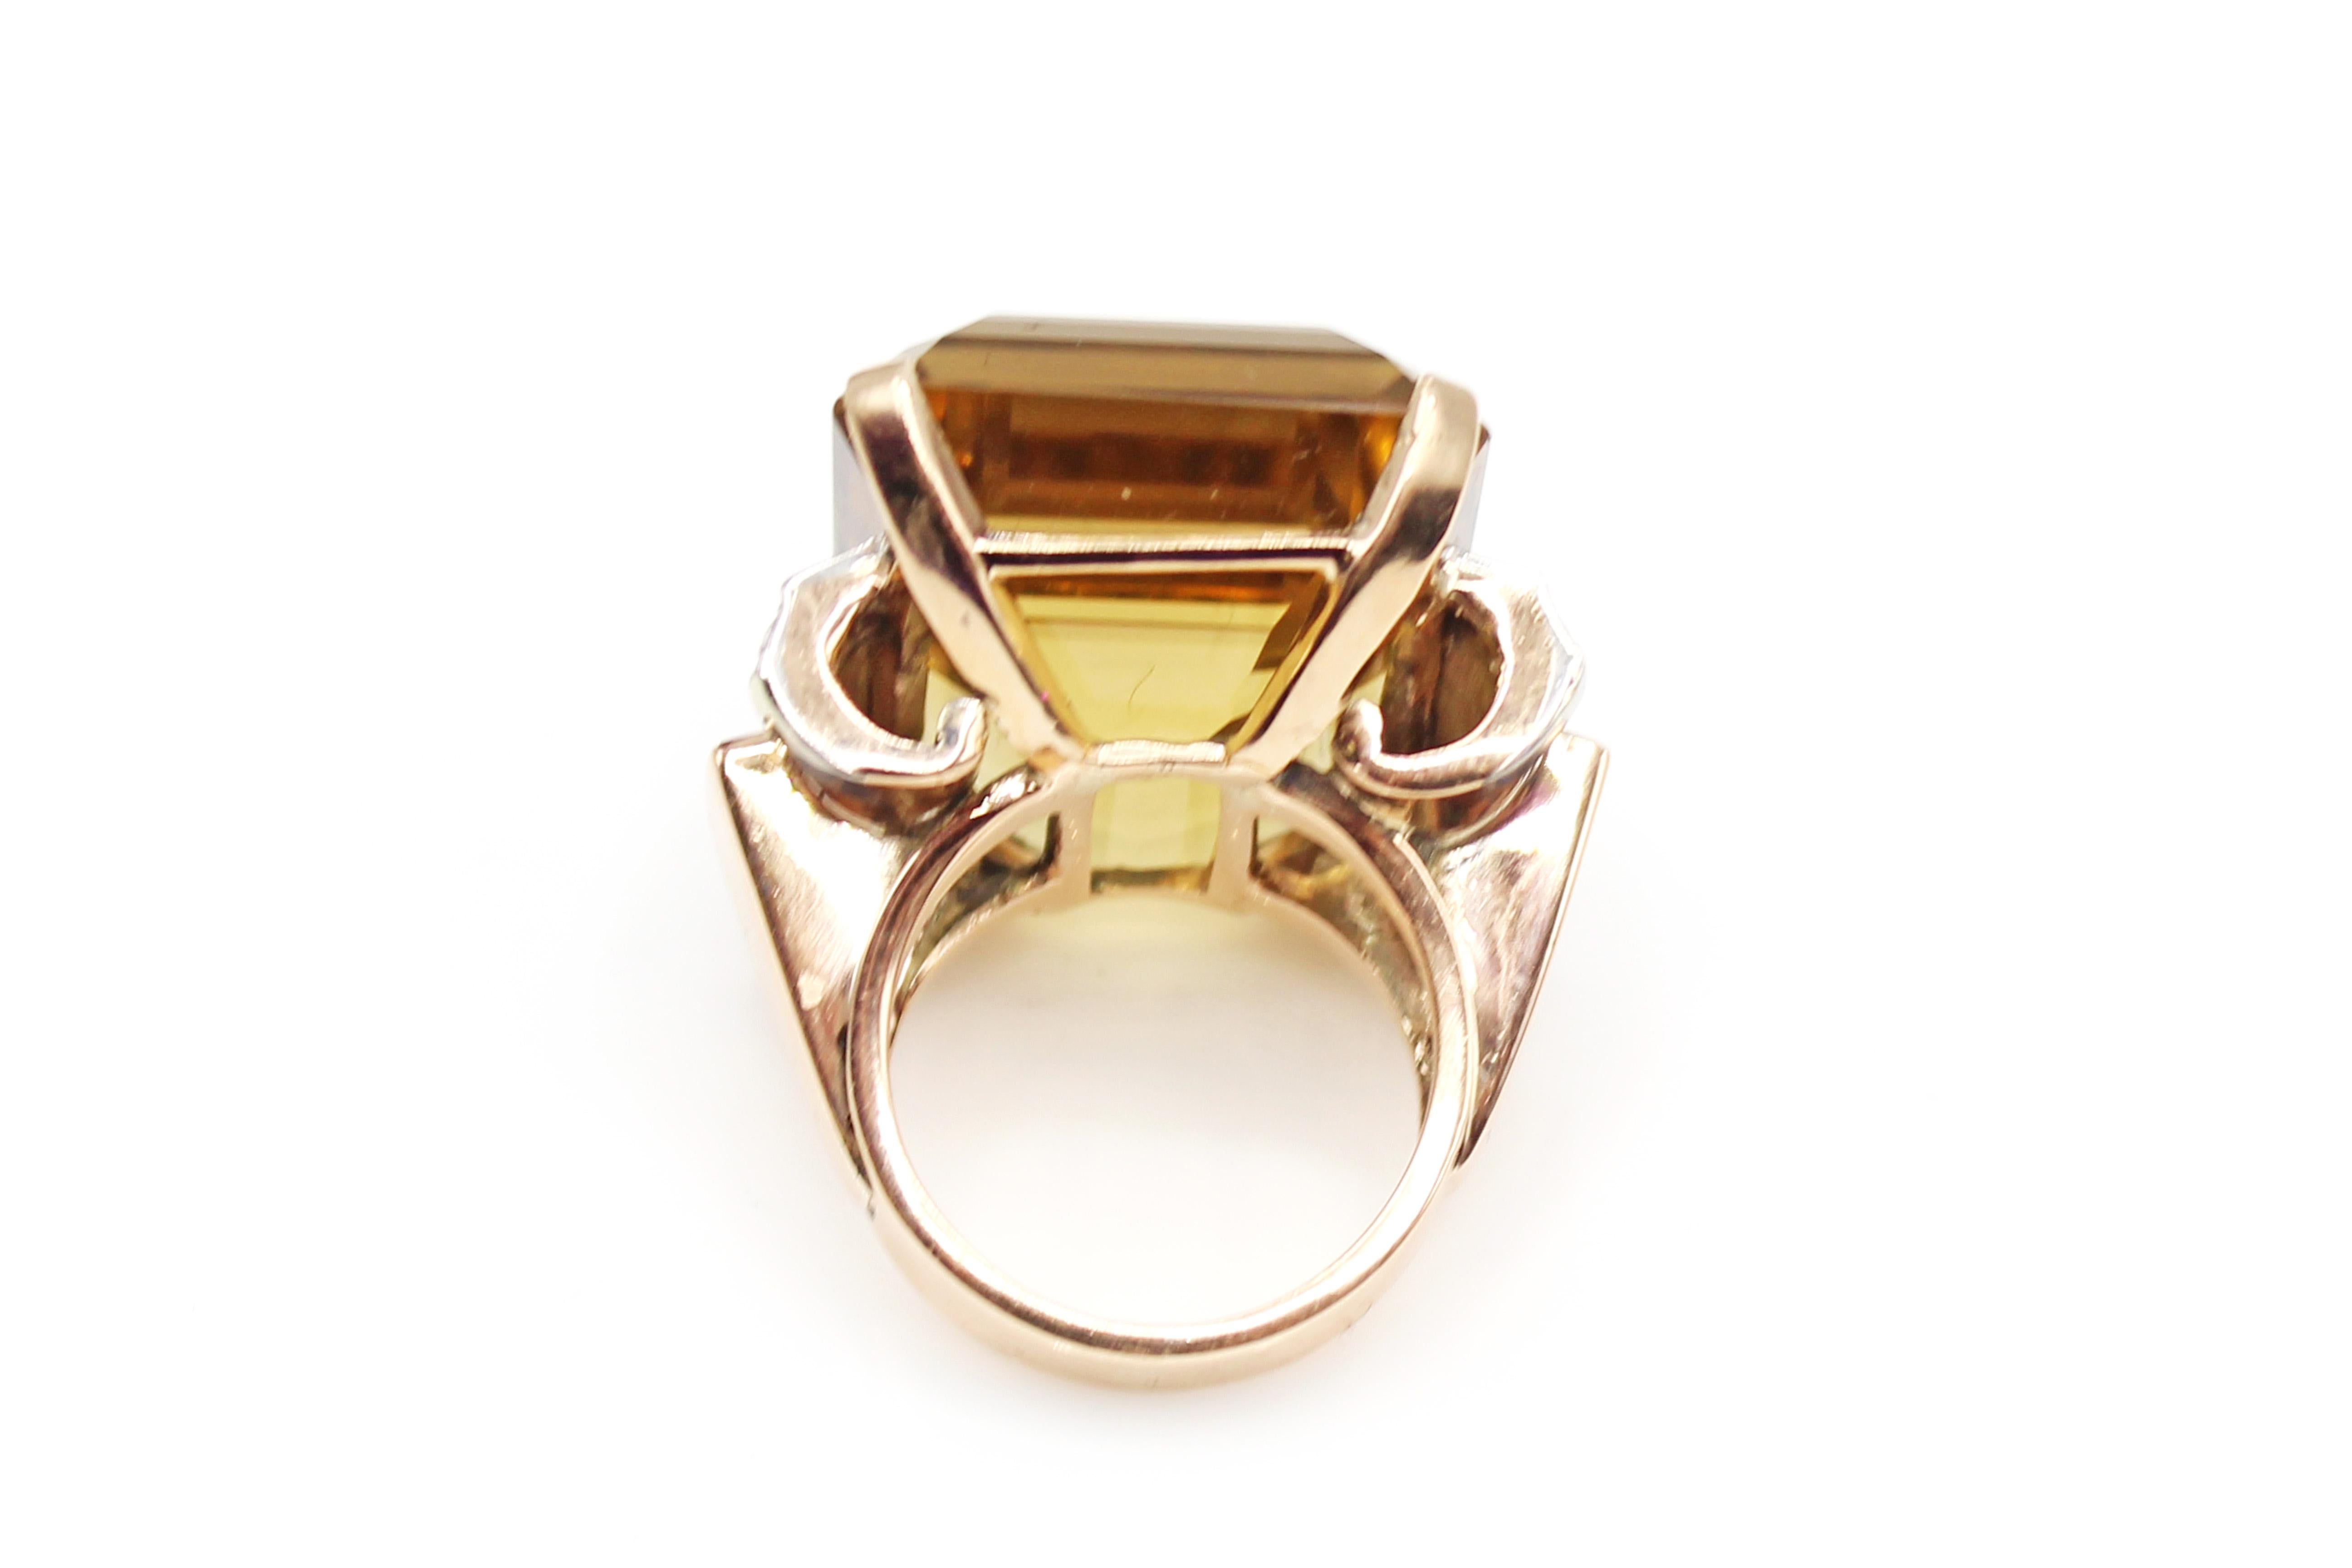 Impressive golden Citrine rose gold diamond ruby ring, centrally set with one emerald cut Citrine measured to weigh approximately 45 carats. The beautiful cut and crystal of this gem stone give it an amazing fire and brilliance which is enhanced by